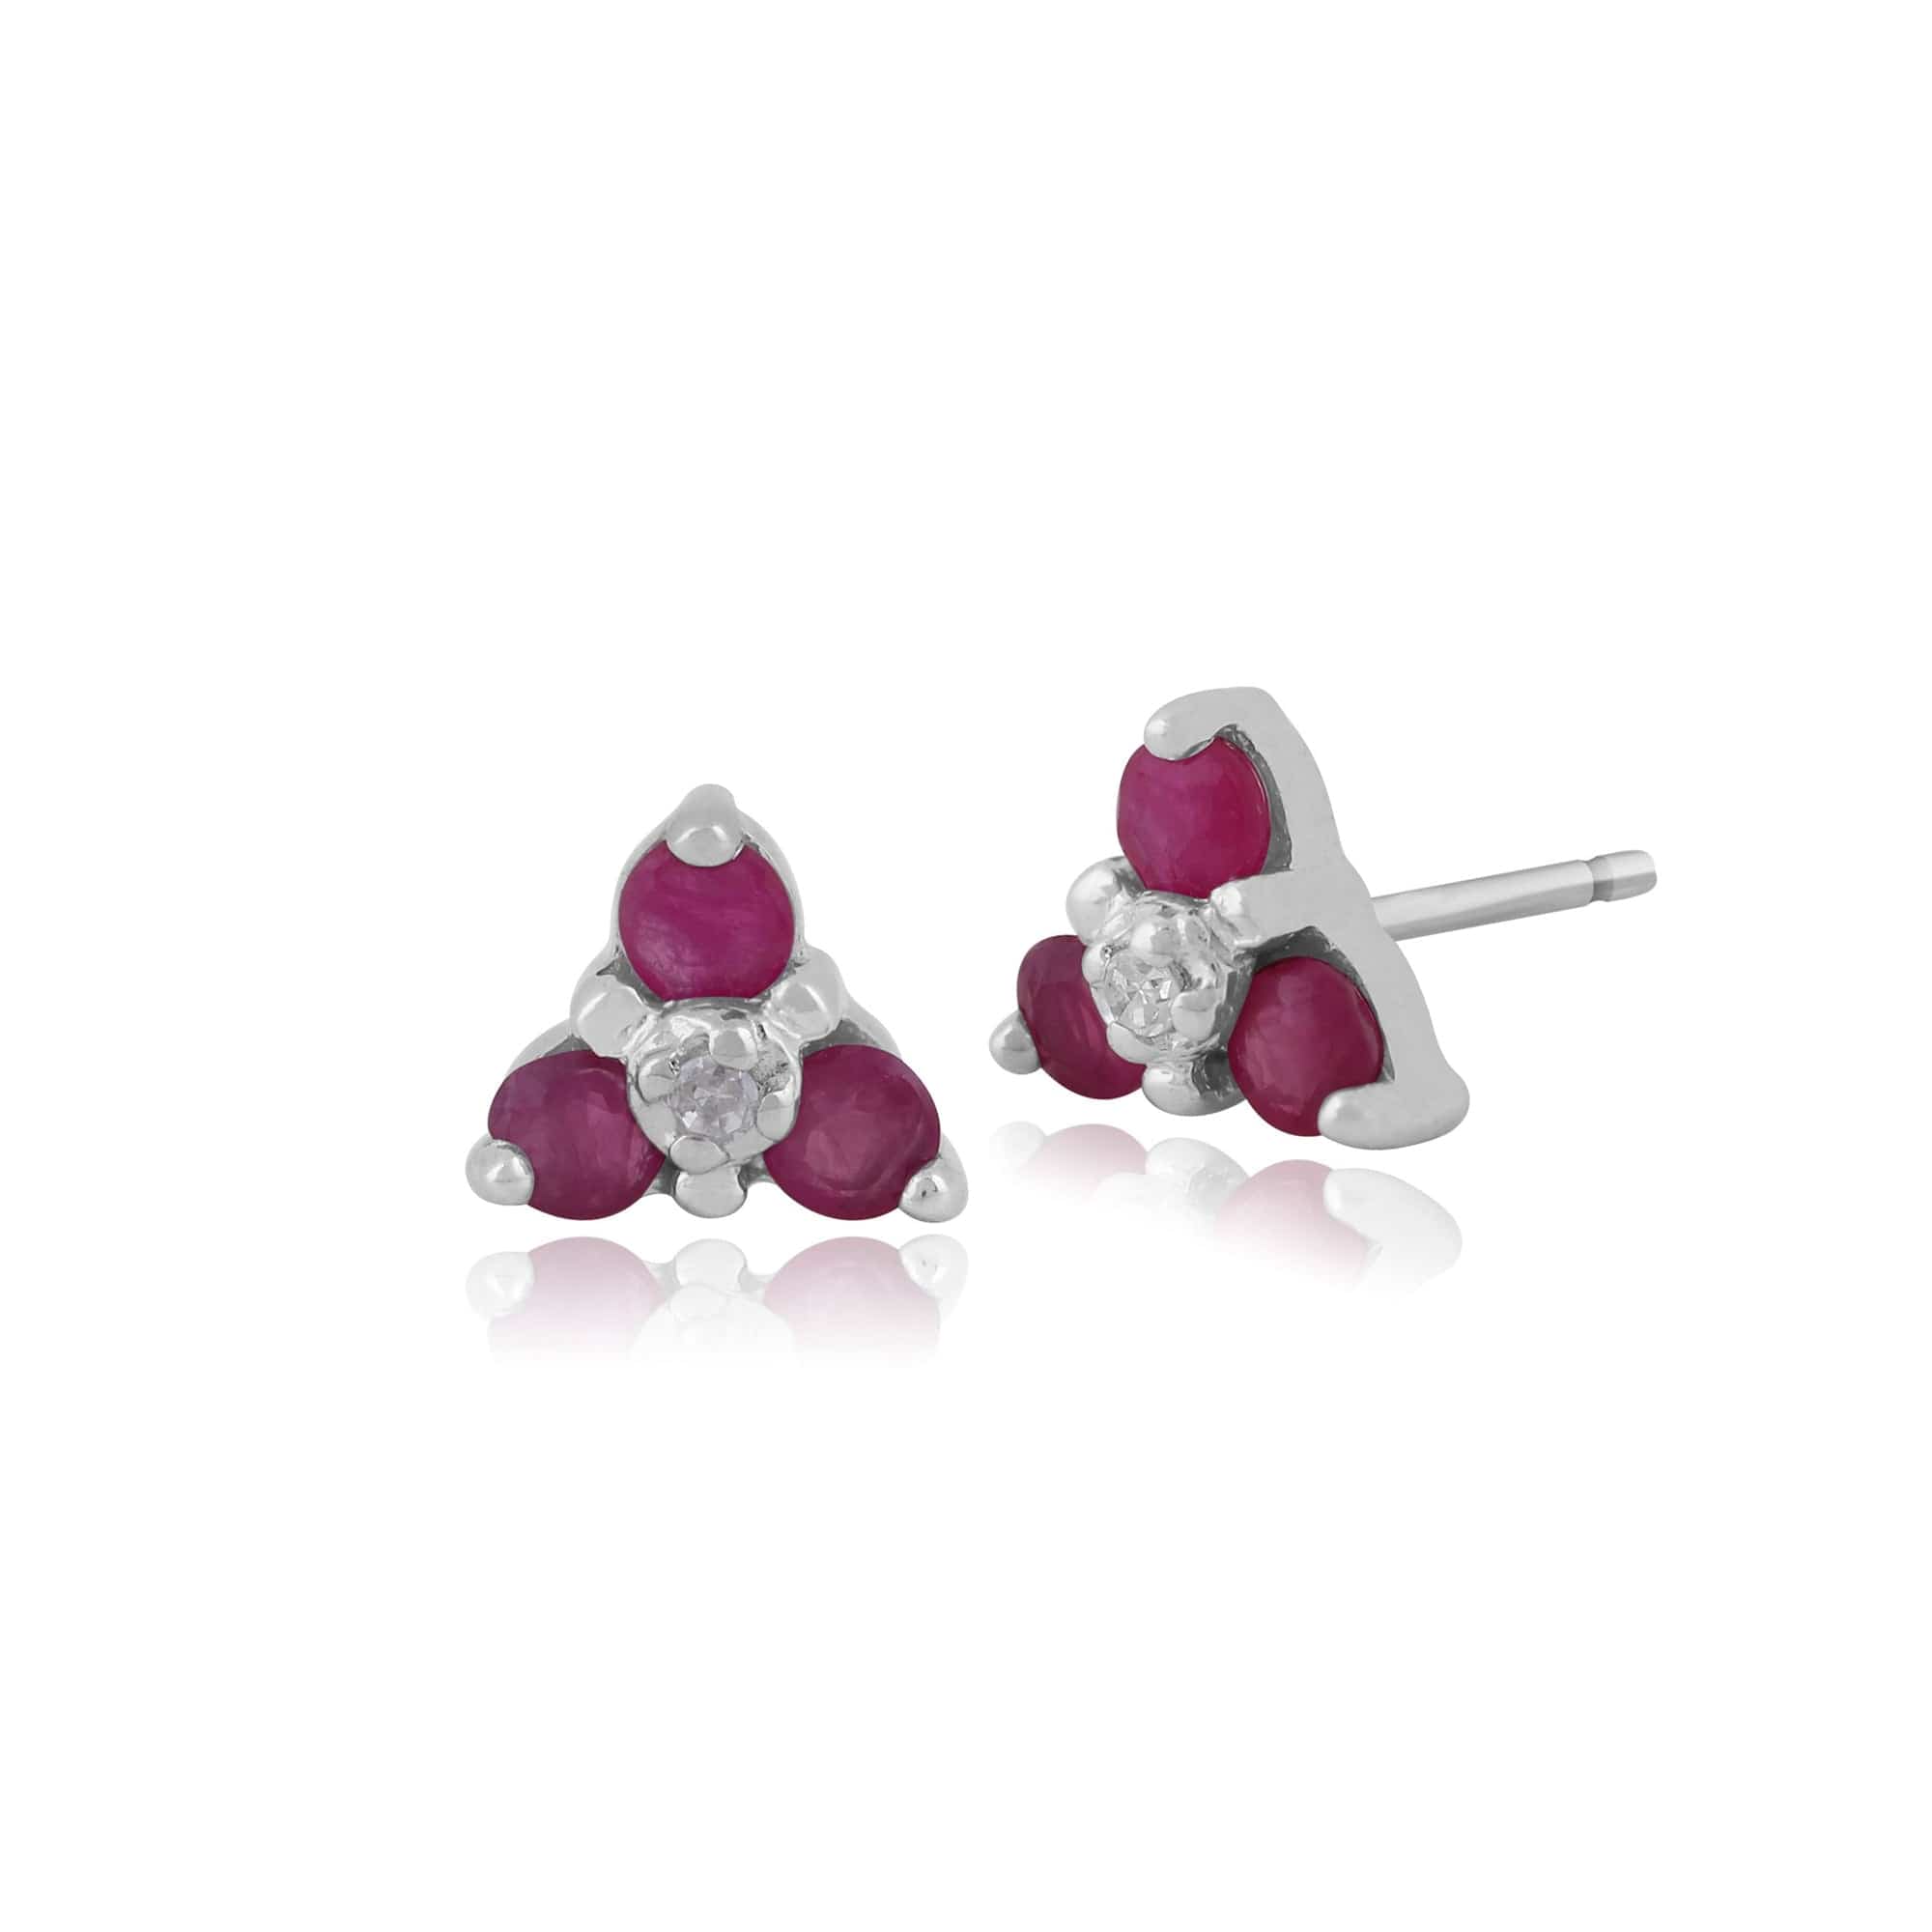 Classic Round Ruby & Diamond Cluster Stud Earrings in 9ct White Gold - Gemondo